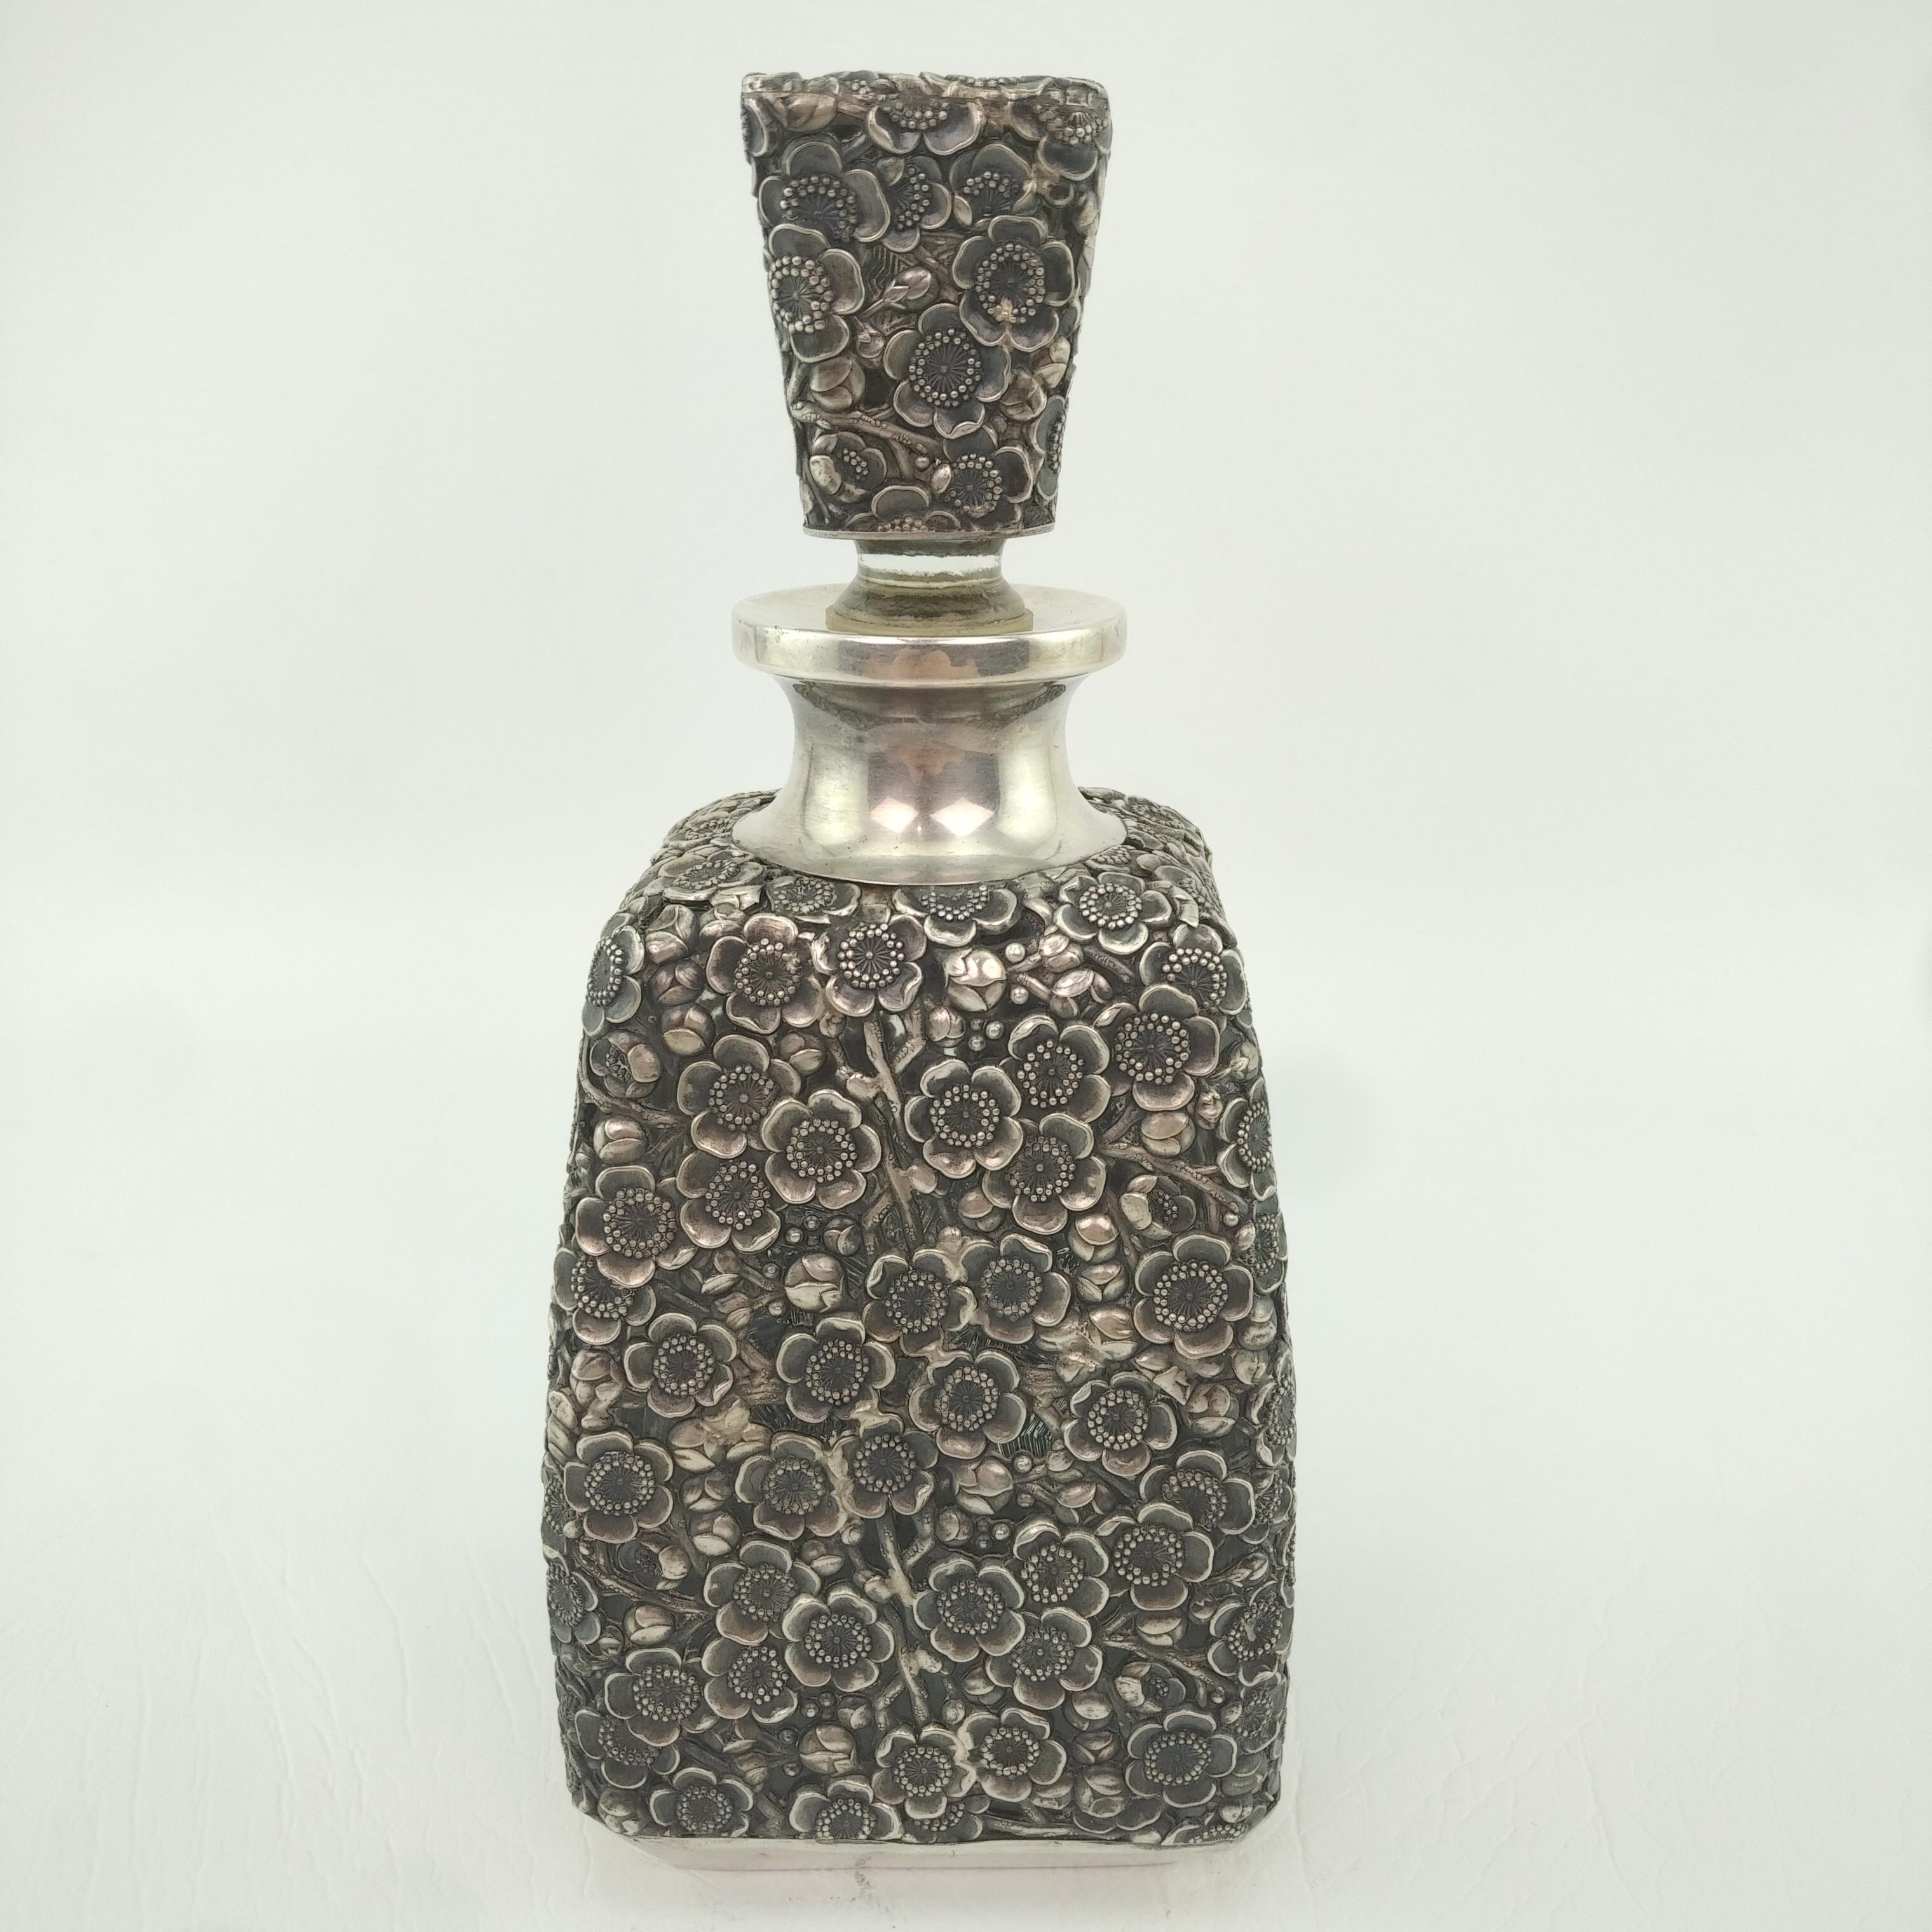 950 Fine Silver overlay decanter, circa 1930.

The silver overlay is a wonderful medley of flowers in repose work over a four sided pinched glass bottle, with a sterling silver overlay covered cork stopper.   Decanter is hallmarked Sterling 950, for